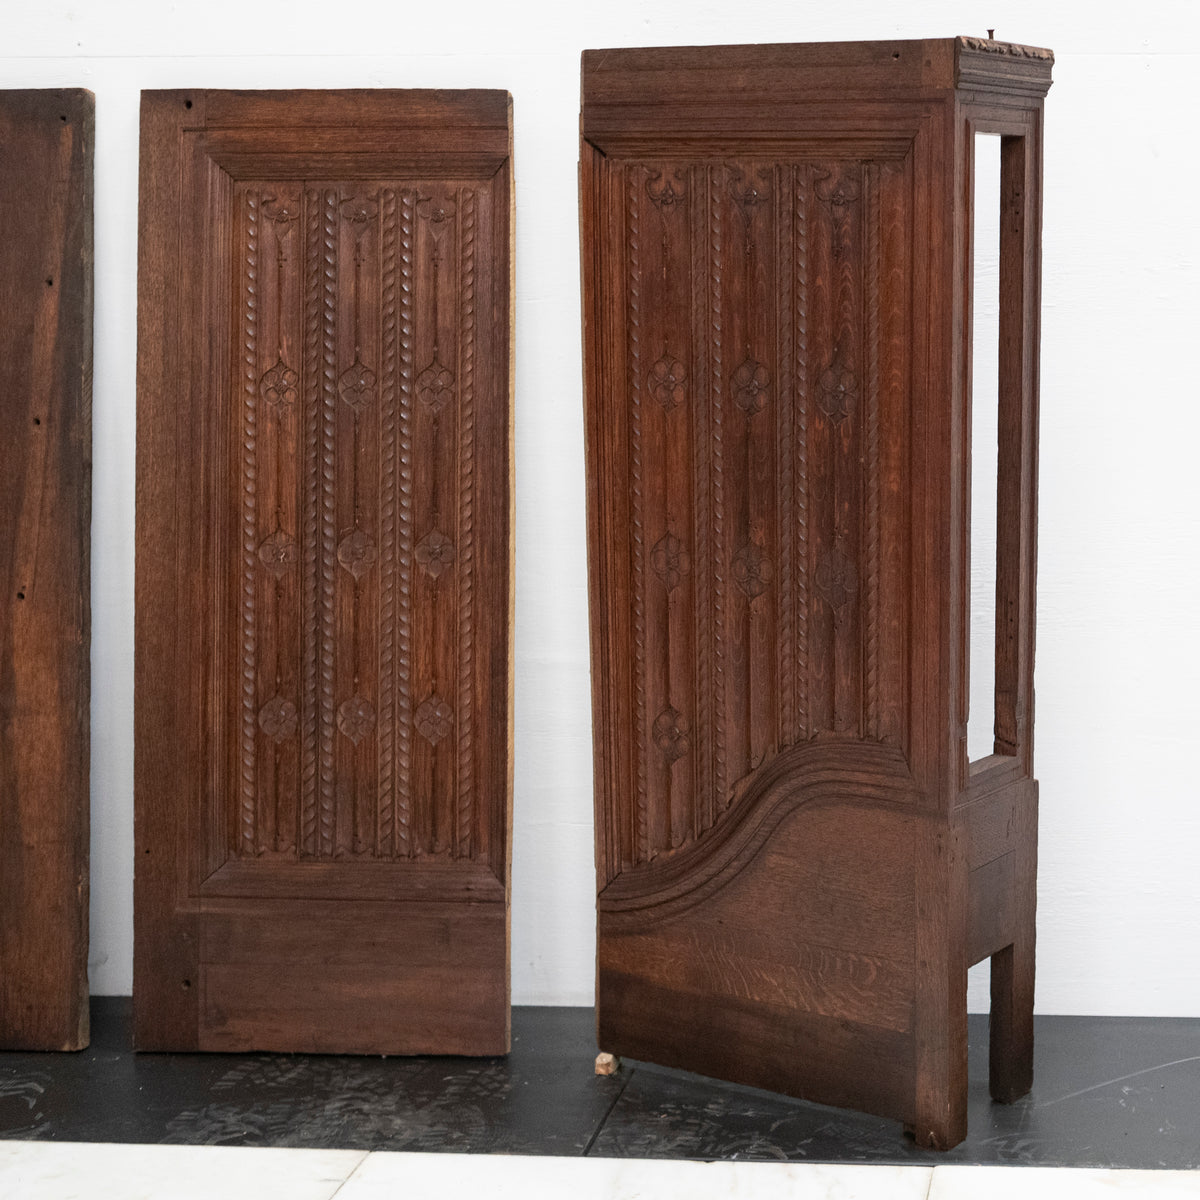 Antique Mid 19th Century Carved Linenfold Oak Panels | The Architectural Forum